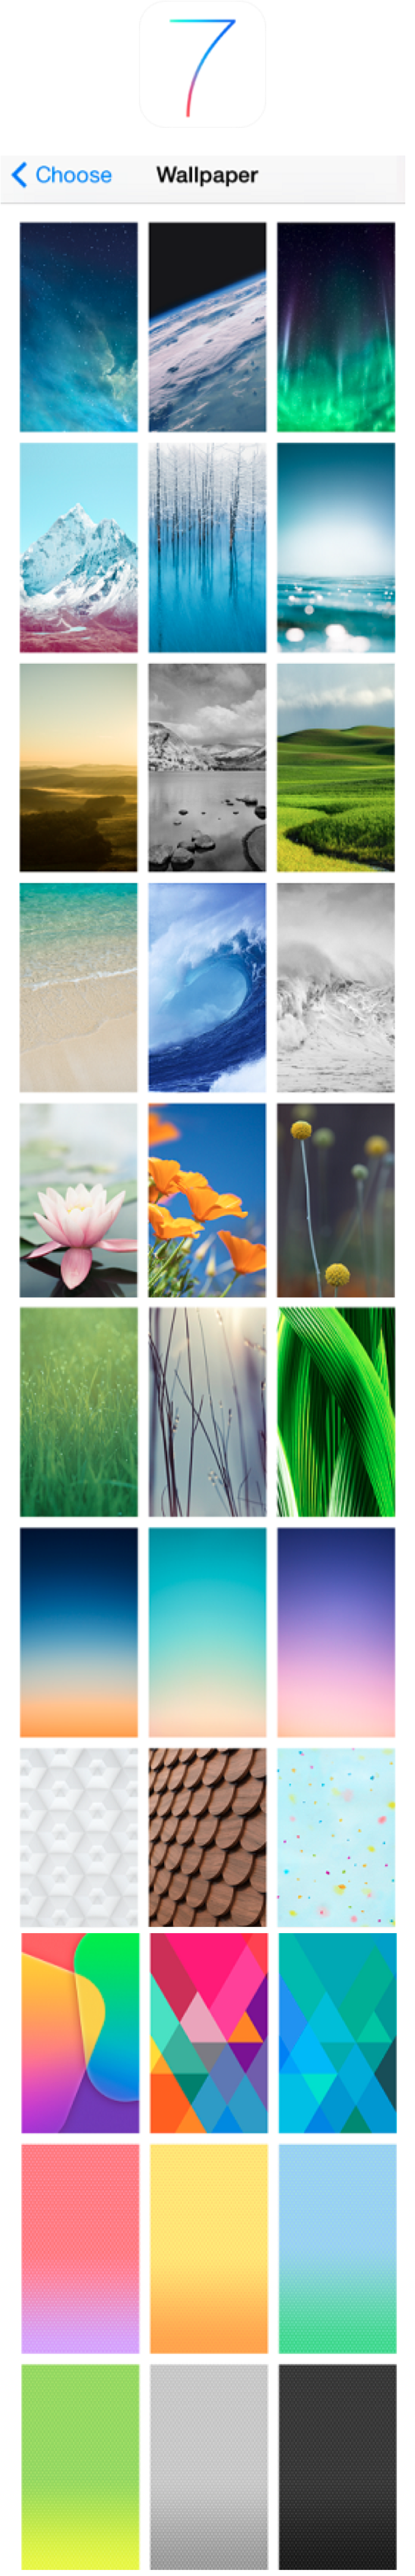 IOS 7 iPad Wallpaper Bundle pt 1 by CptnEclectic on DeviantArt